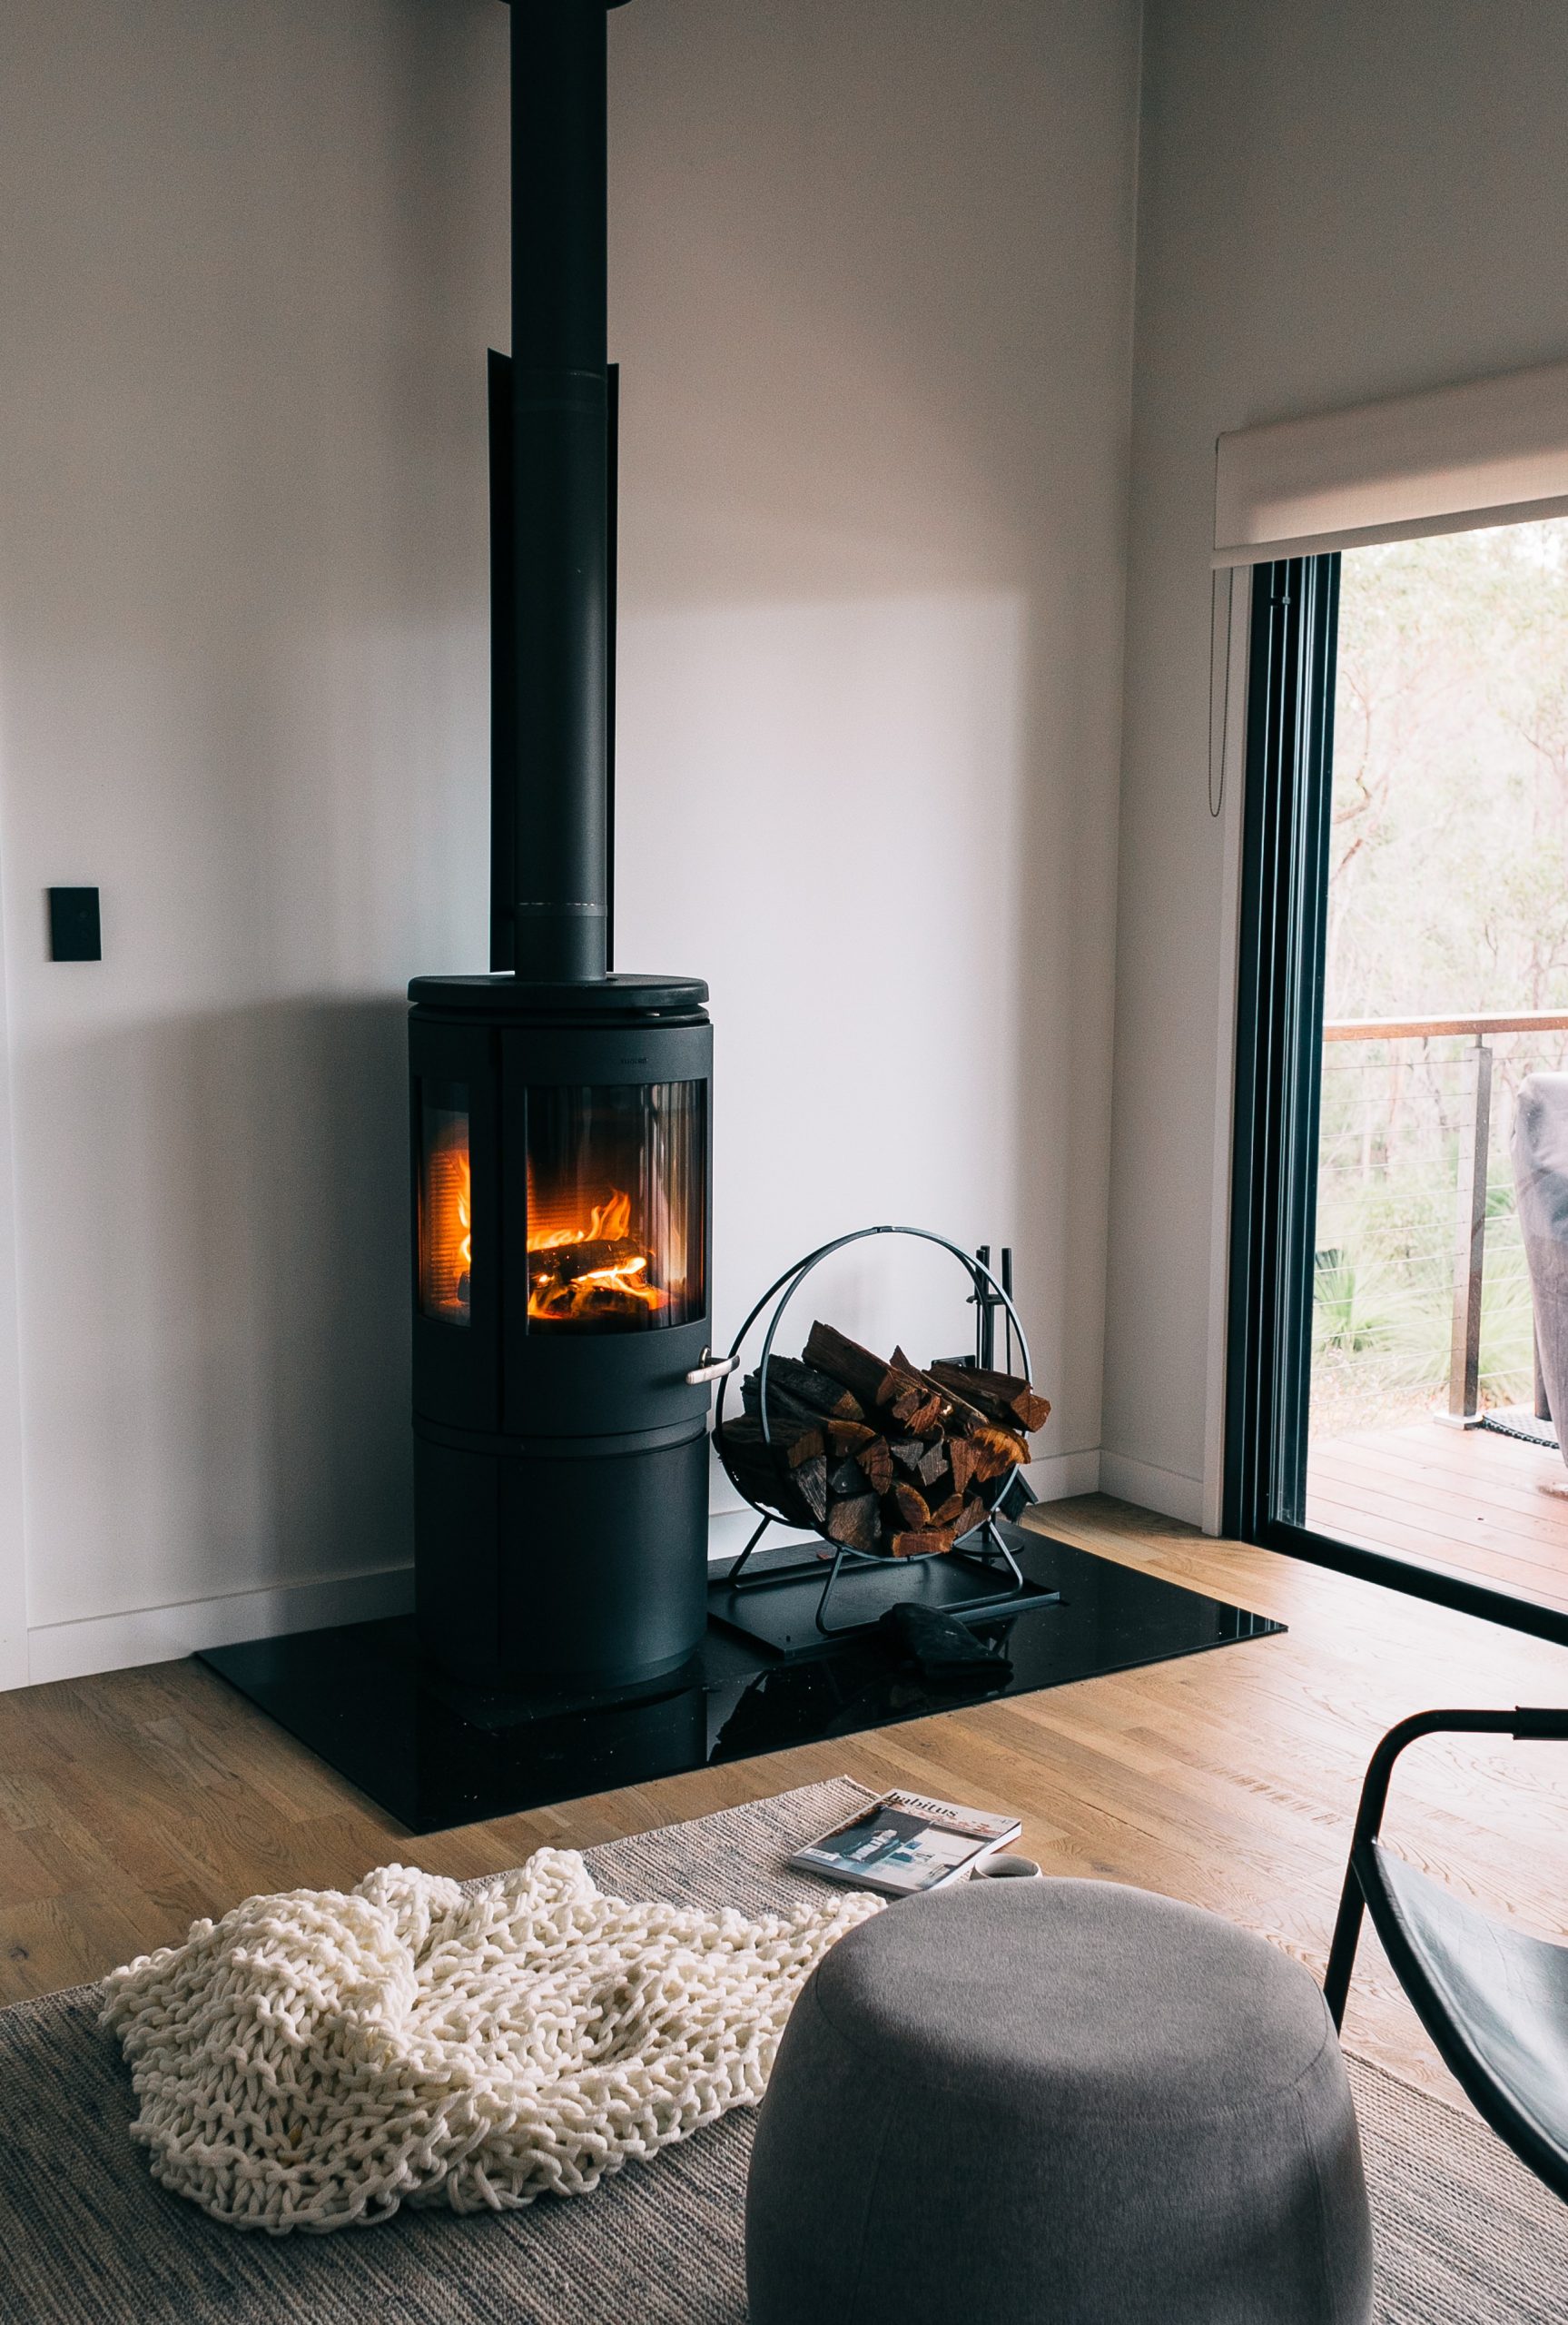 Advantages and disadvantages of a house with a fireplace